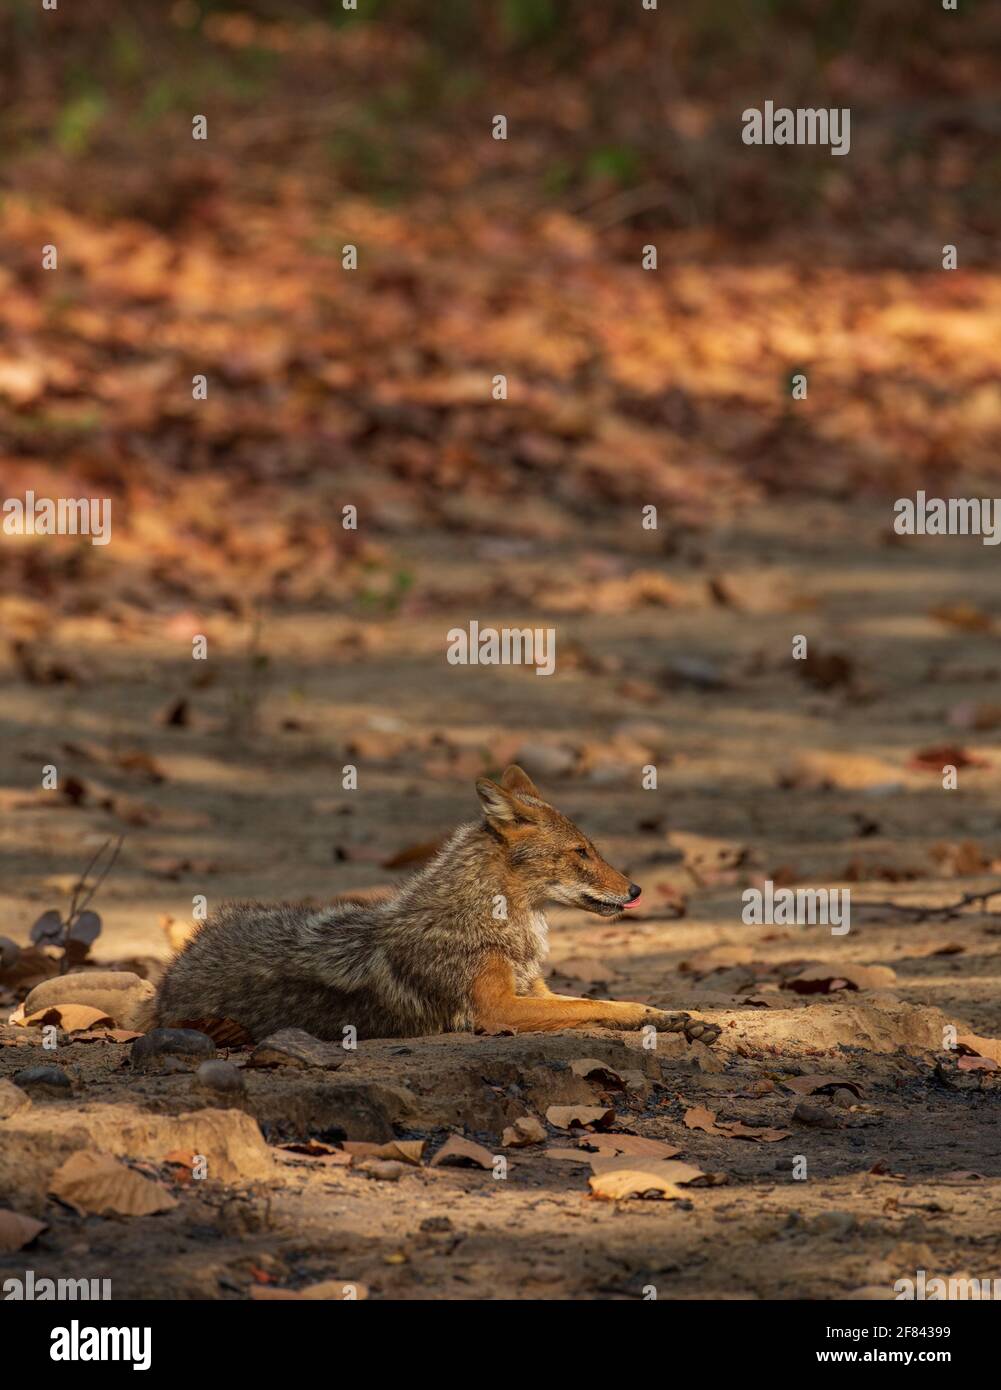 A Golden Jackal sitting on a mud trail in Jim Corbett National Park (India) Stock Photo